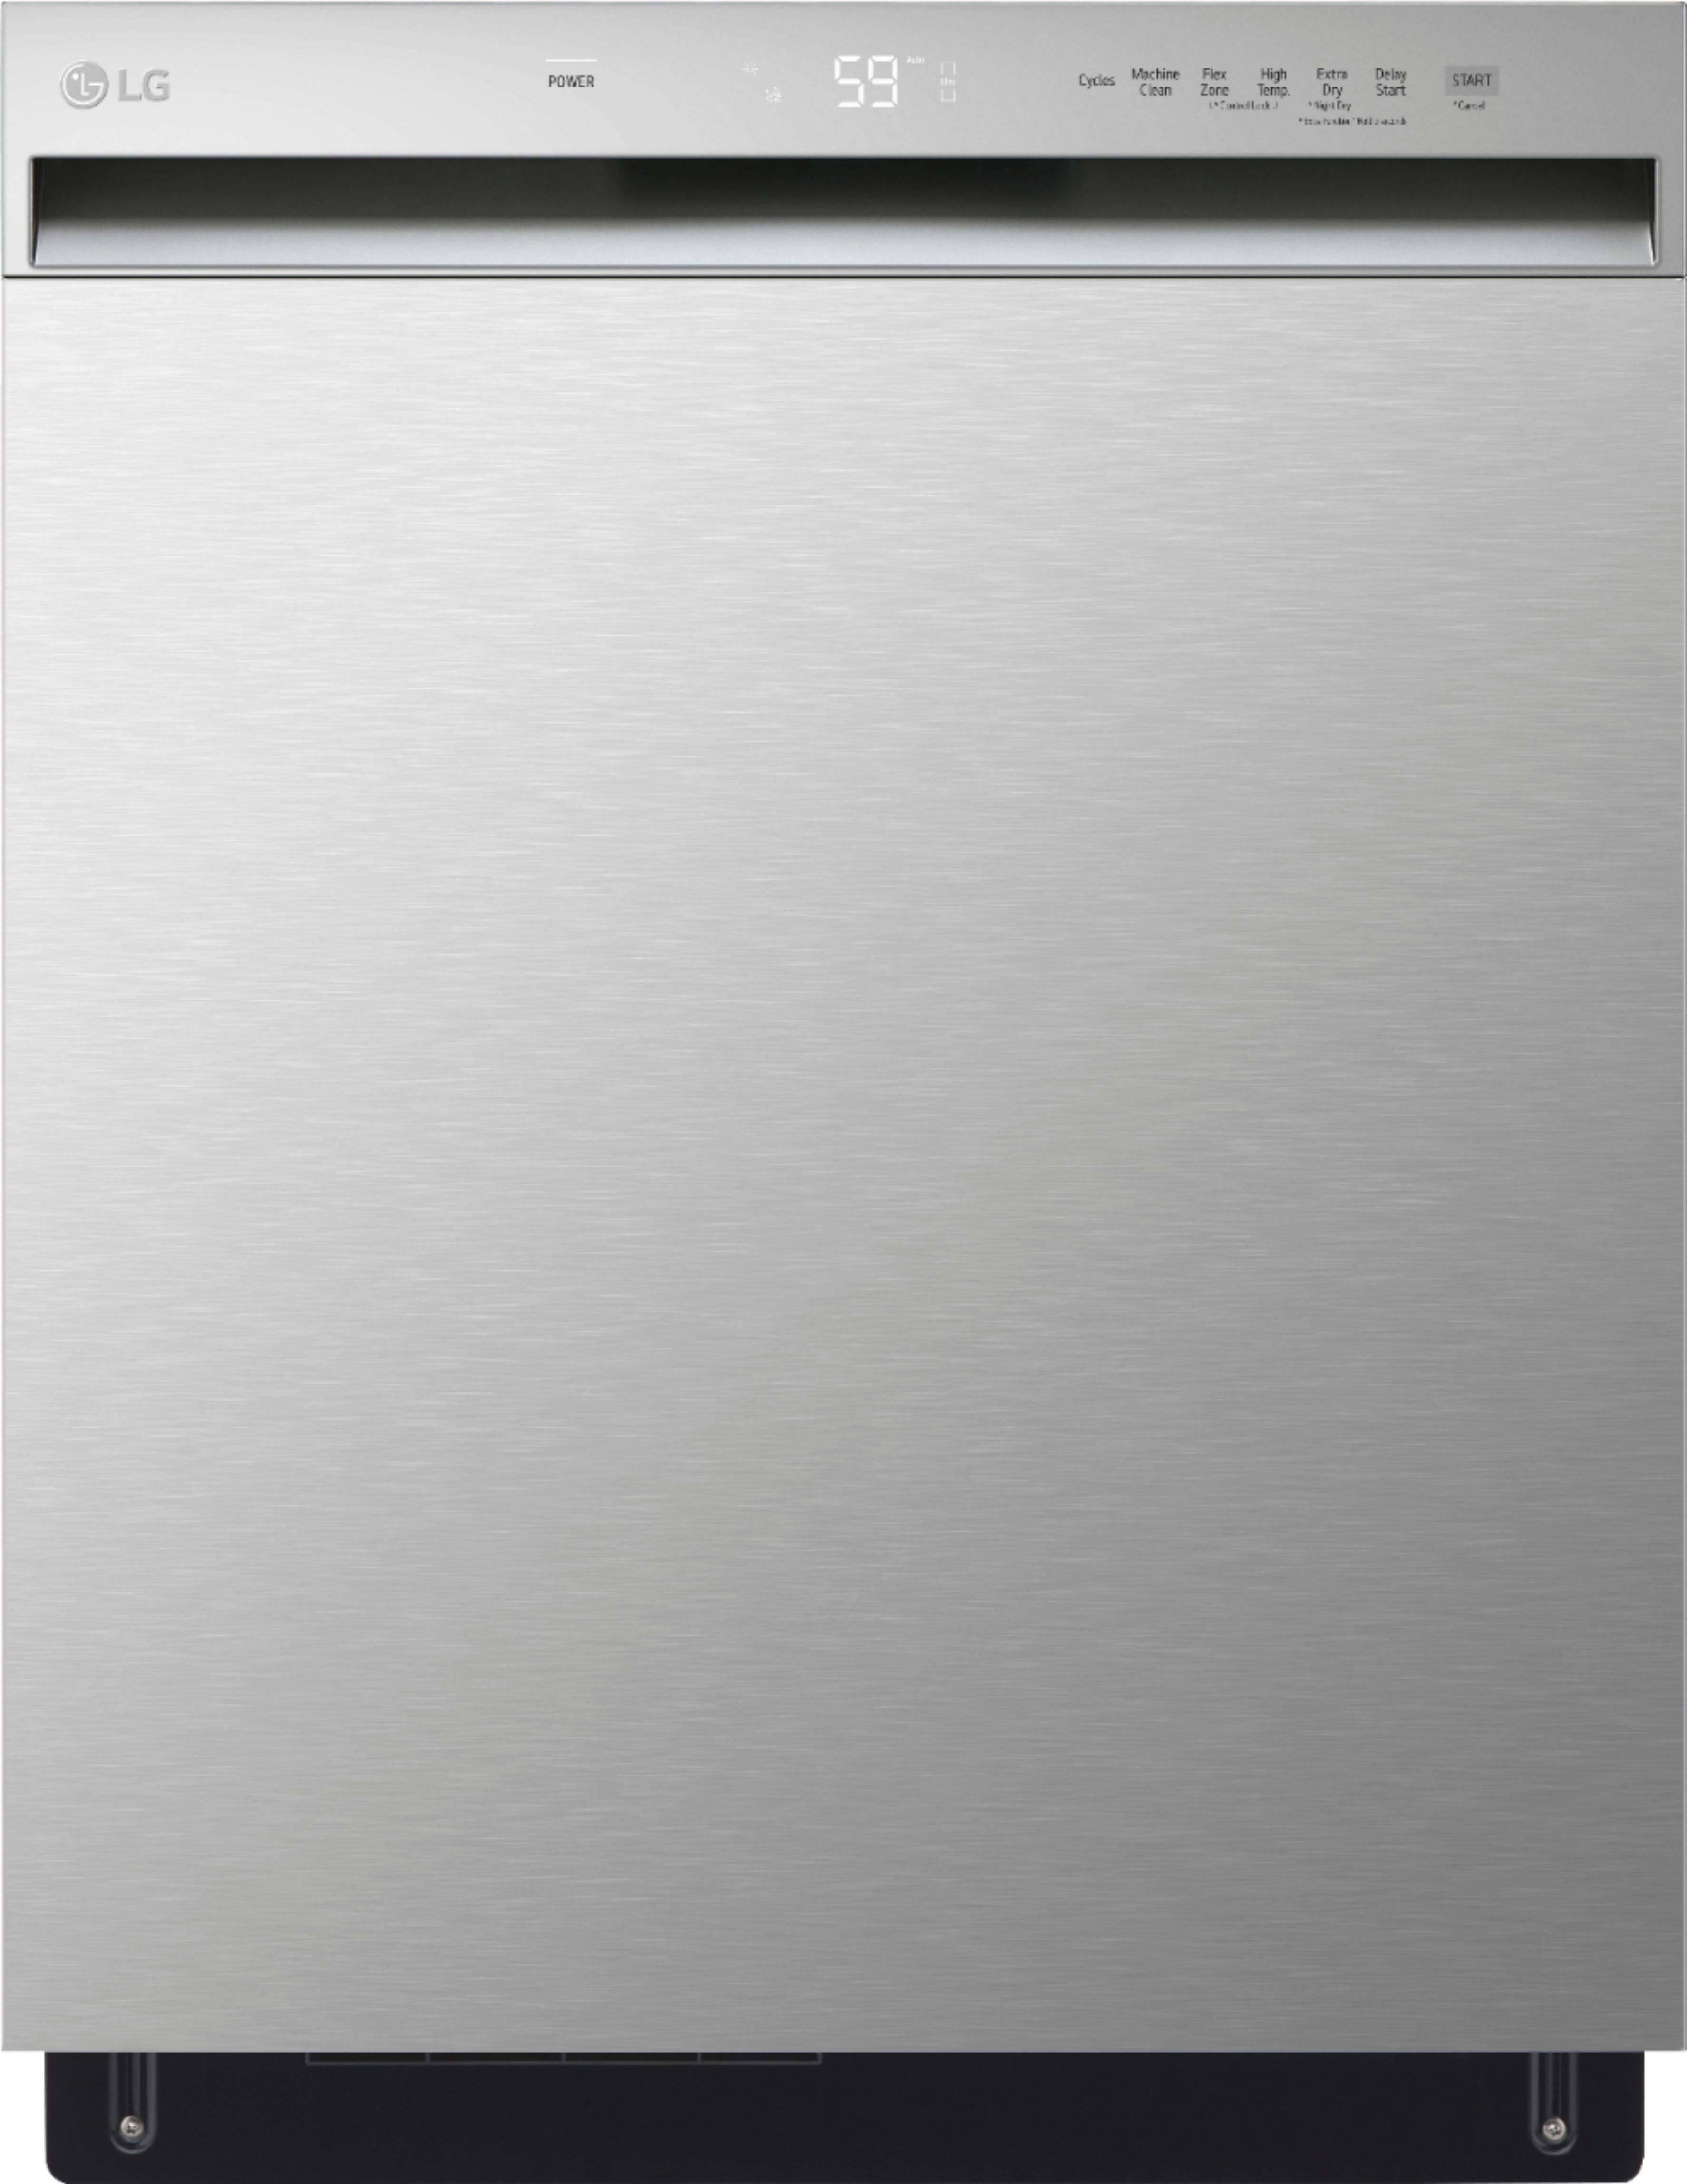 Product Image of the LG Stainless Steel Dishwasher